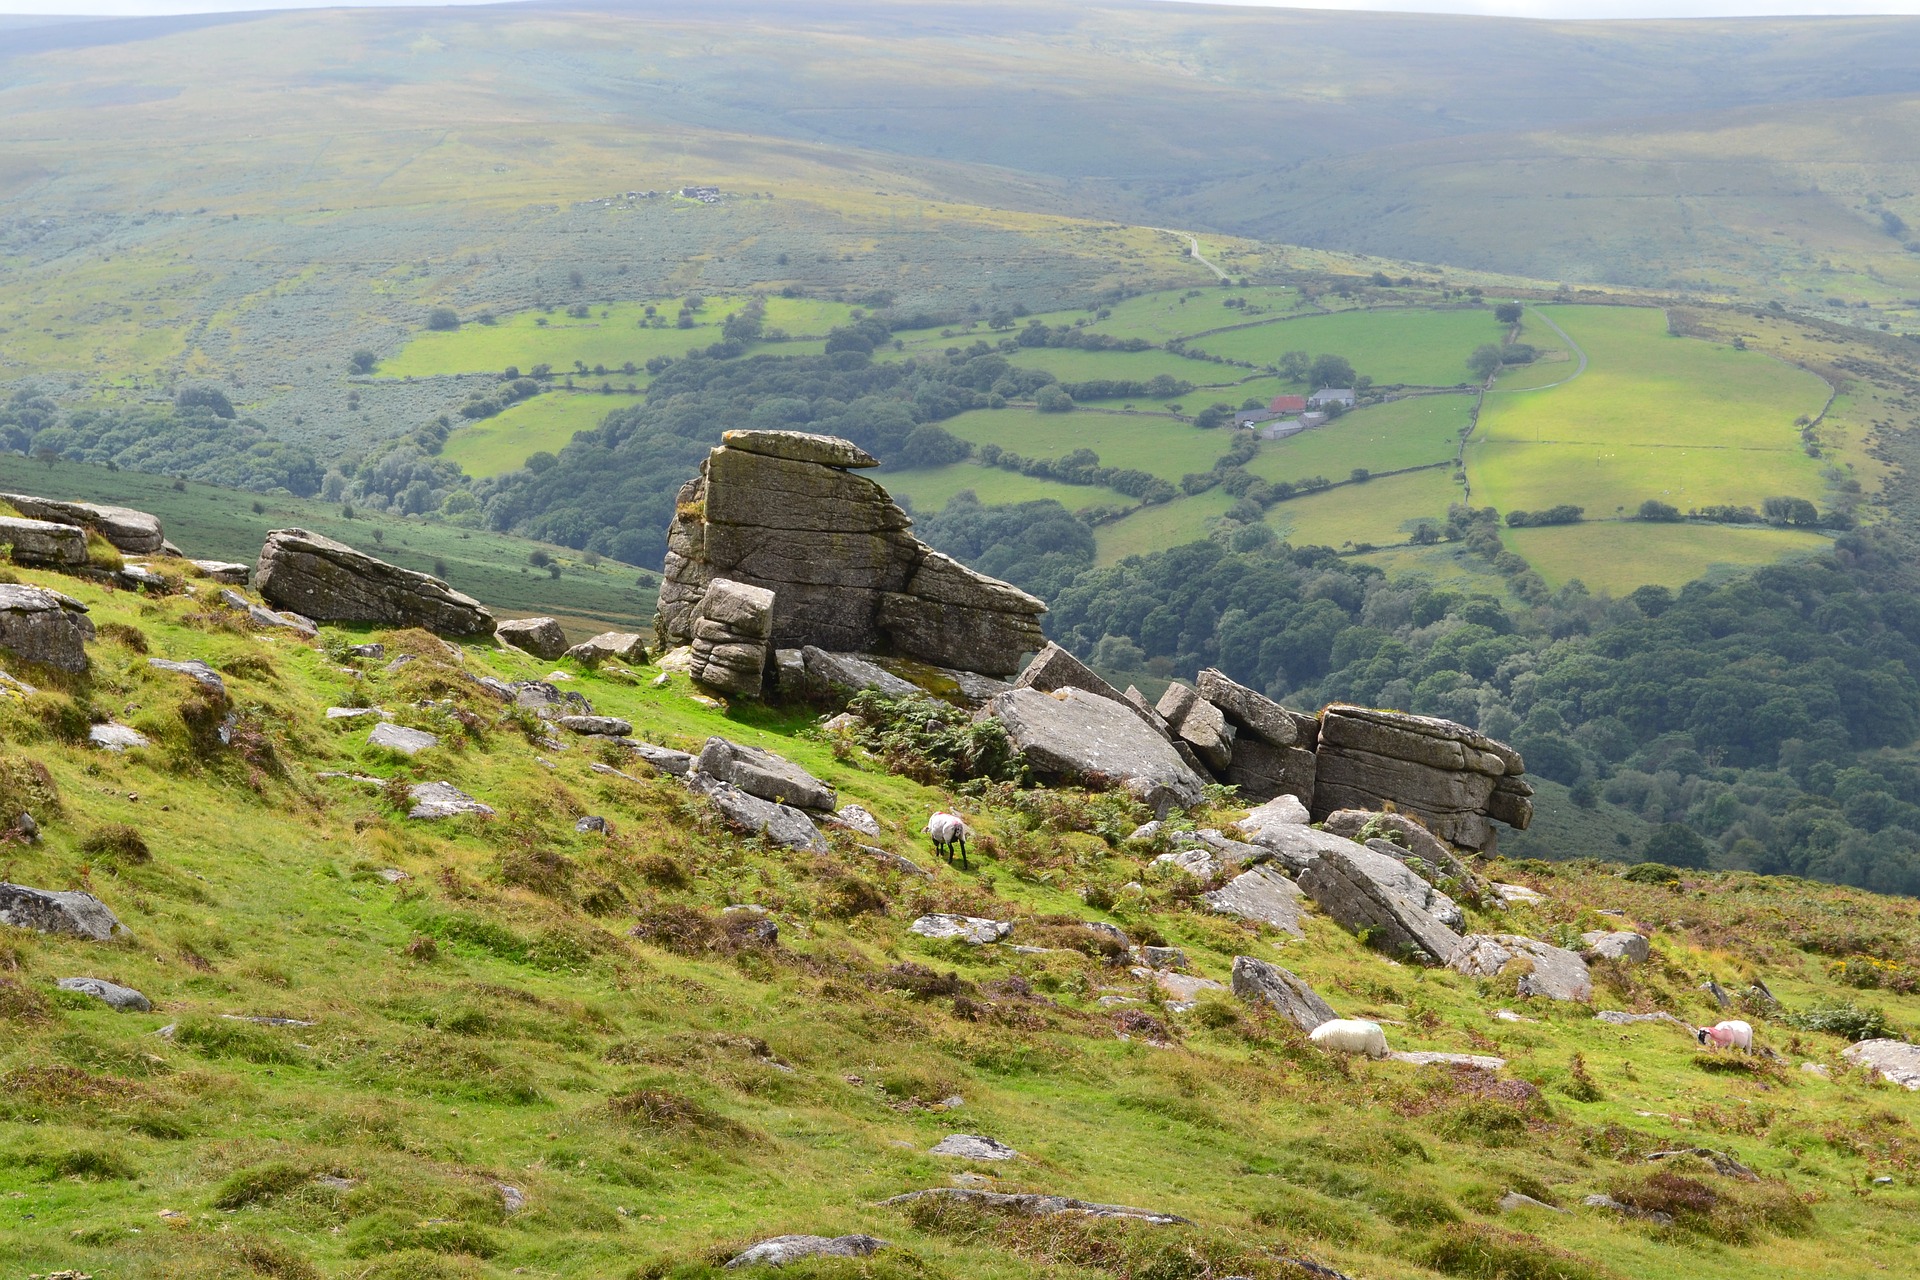 A rolling Dartmoor scene topped with wild heath and grassland, craggy tors and sheep